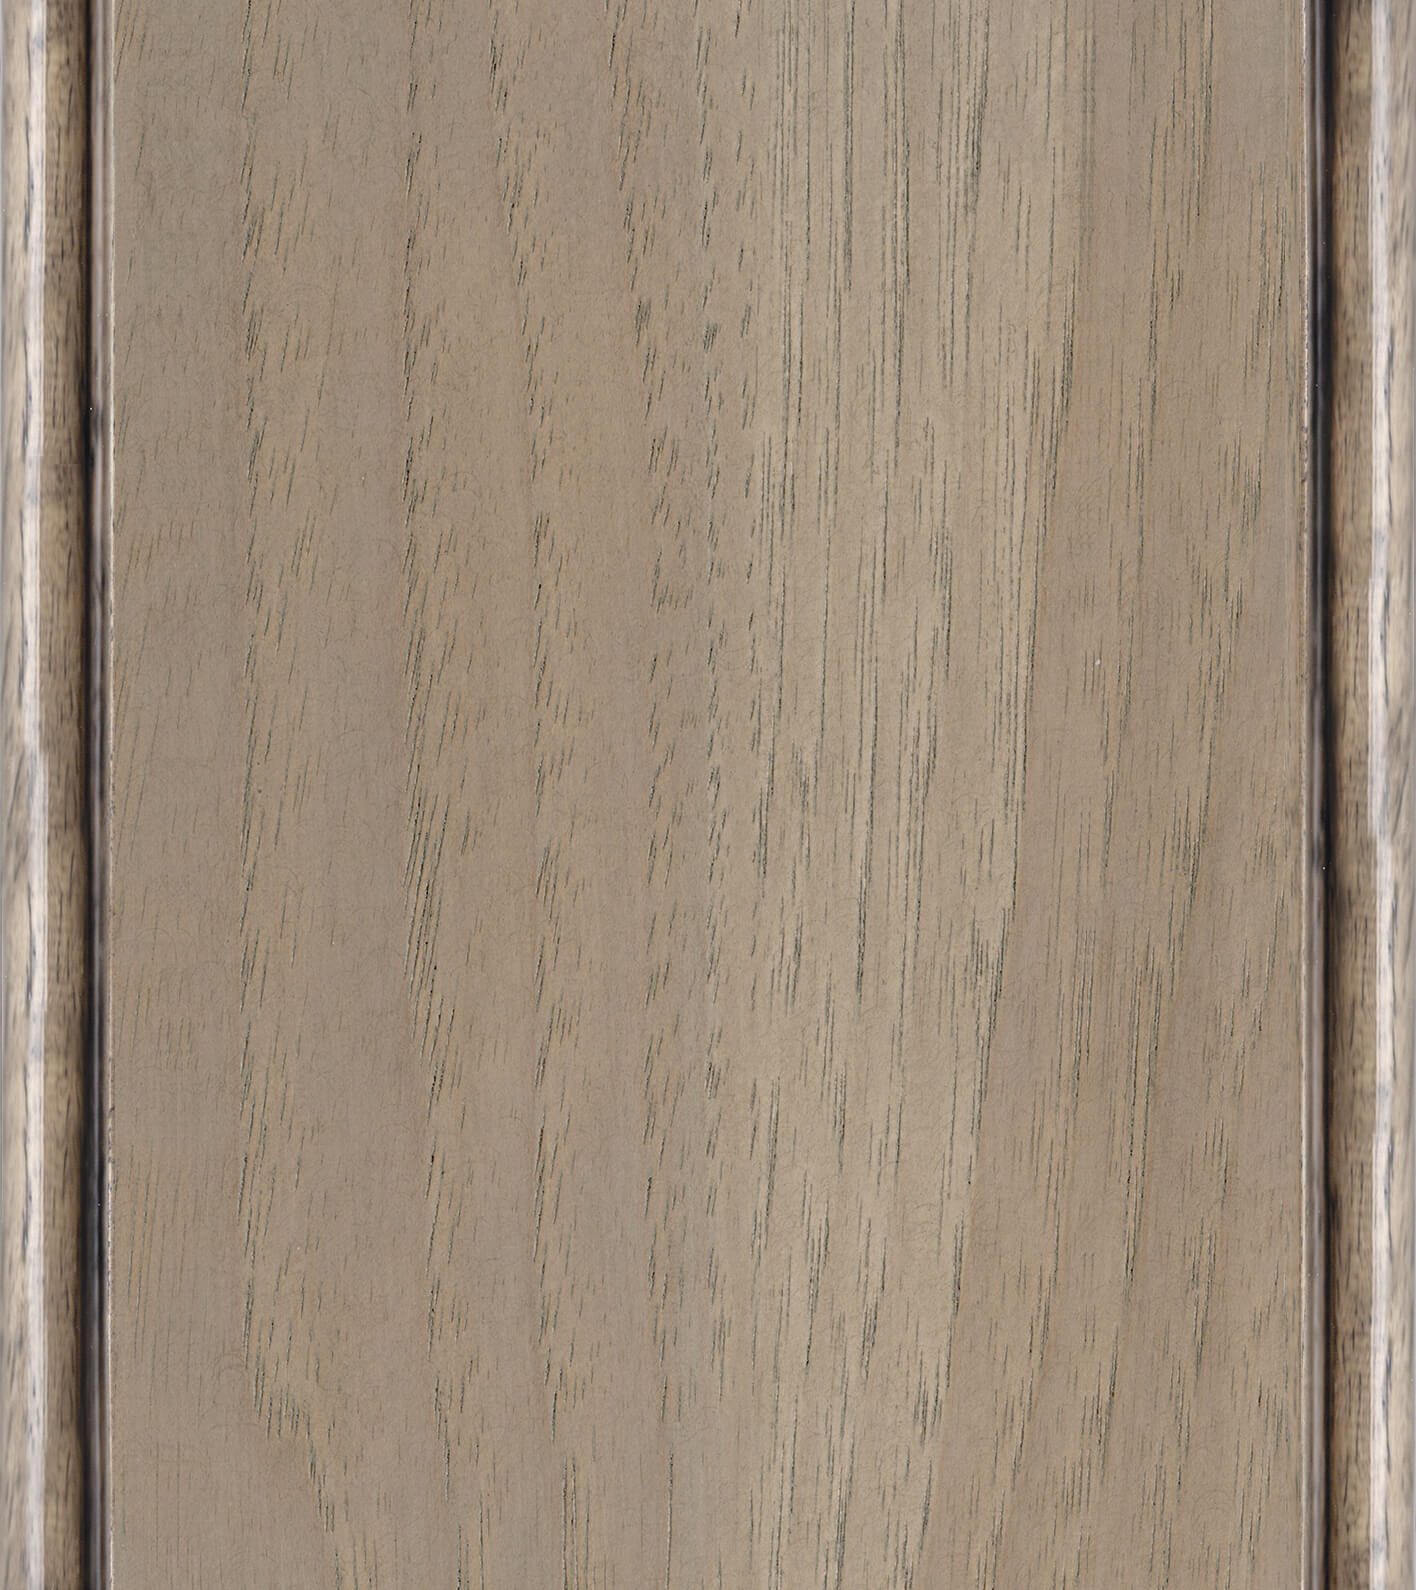 Cashew Stain on Hickory or Rustic Hickory